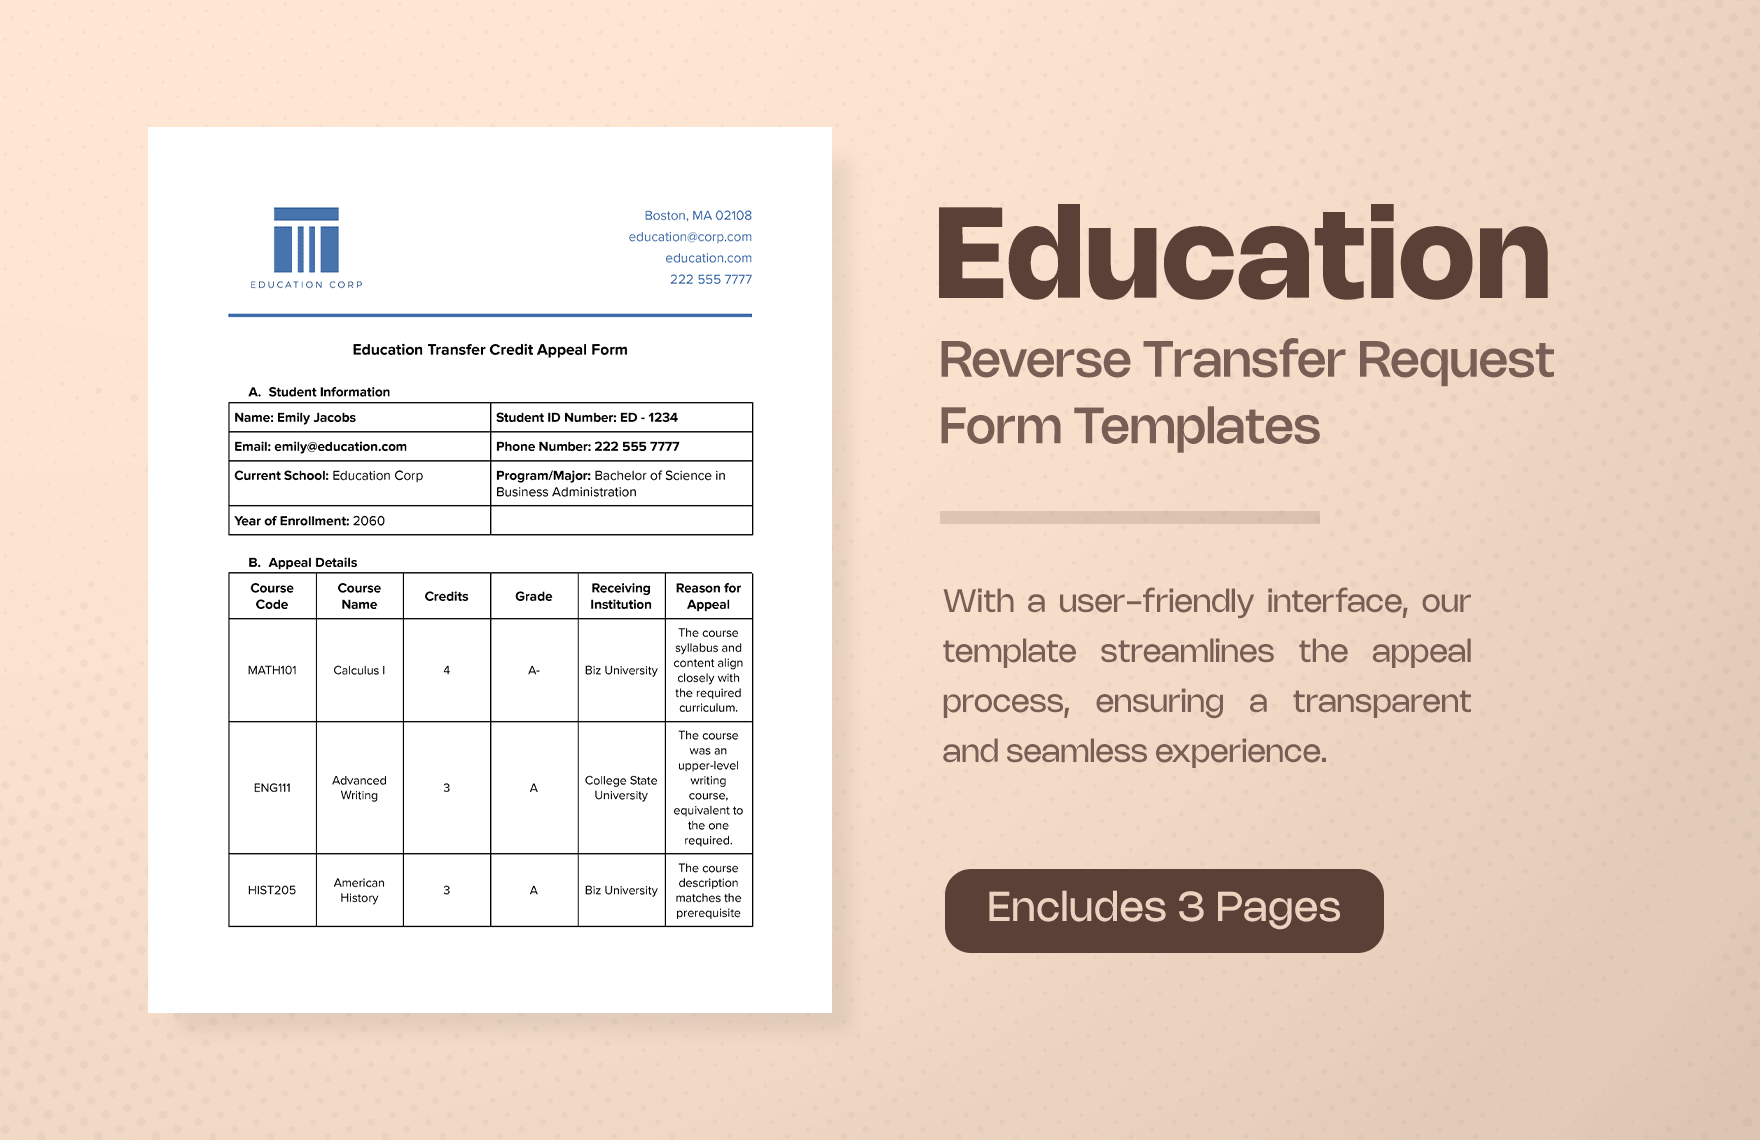 Education Transfer Credit Appeal Form Template in Word, Google Docs, PDF